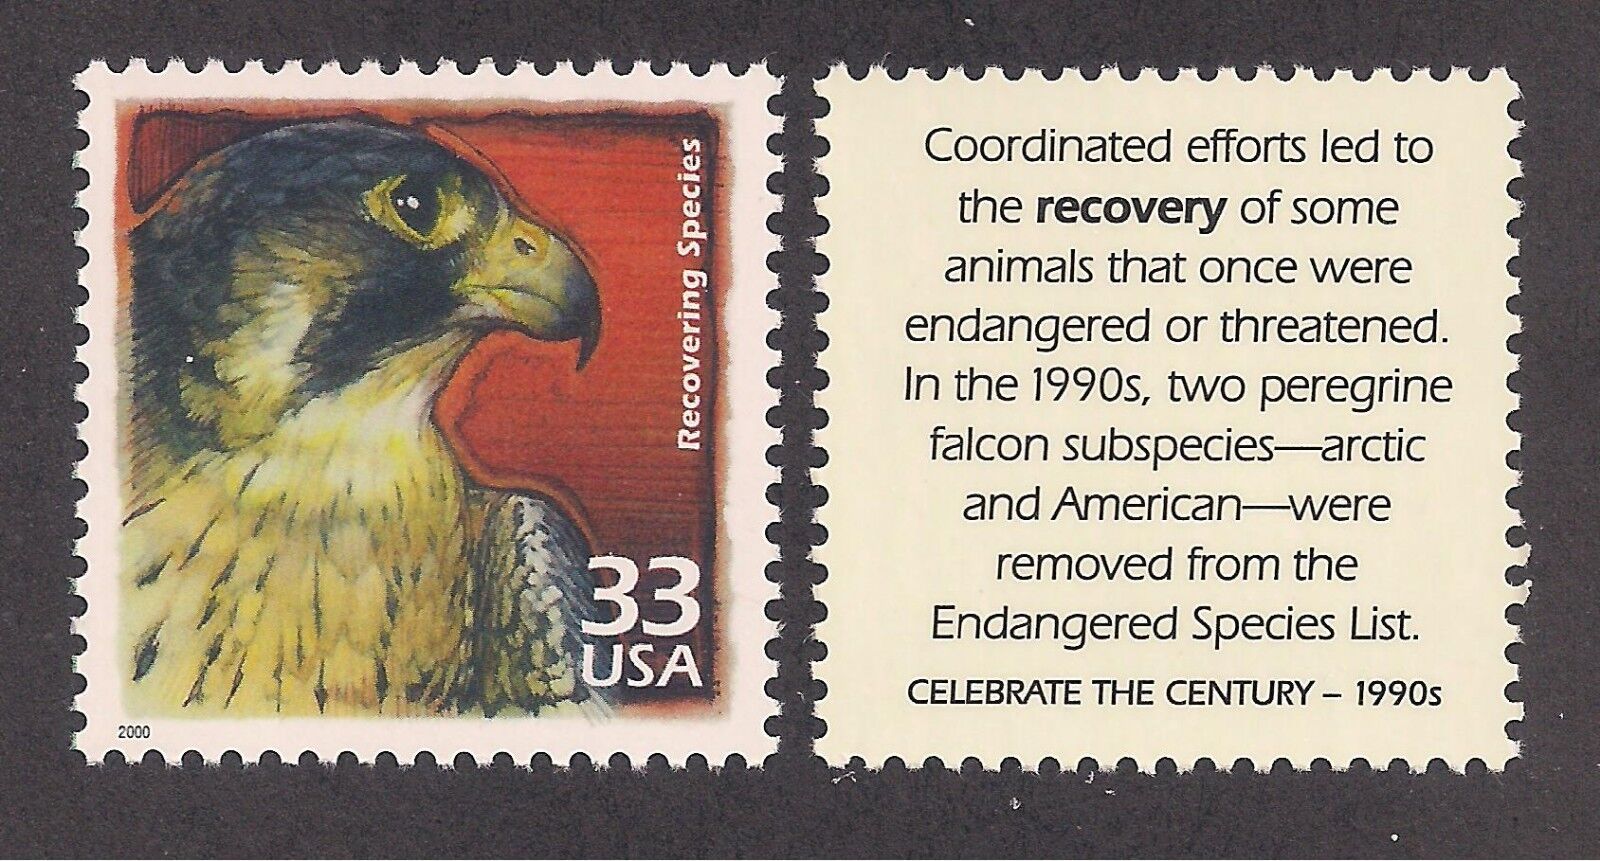 ENDANGERED SPECIES - PEREGRINE FALCON - U.S. POSTAGE STAMP - MINT CONDITION